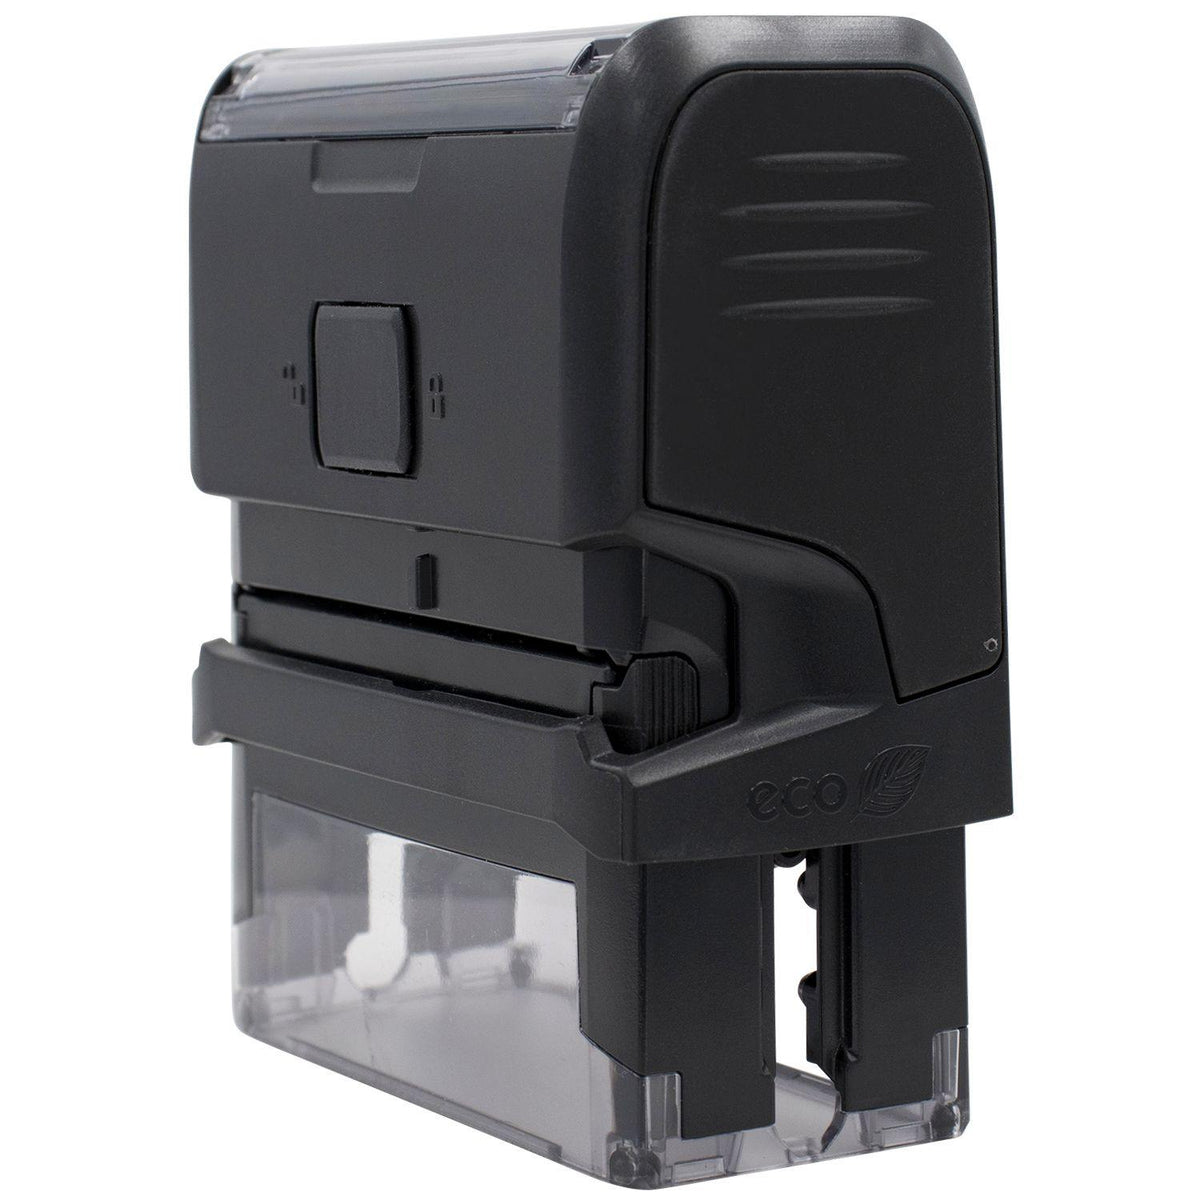 Side View of Large Self Inking Capitation Stamp at an Angle